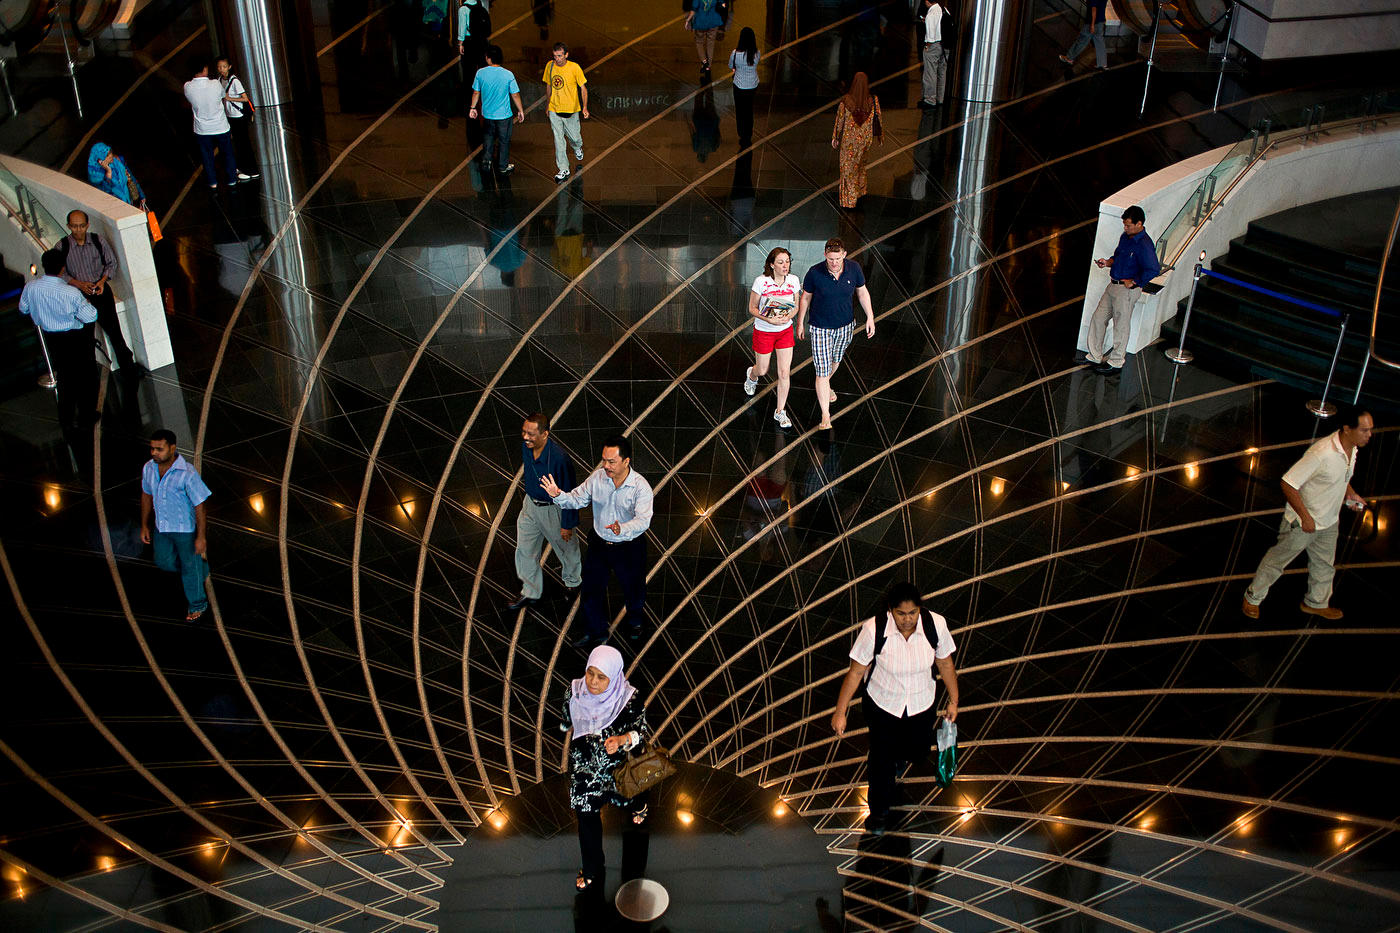 Petronas Tower lobby, Kuala Lumpur :  DAILY LIFE; The Rich, the Poor & the Others : Viviane Moos |  Documentary Photographer